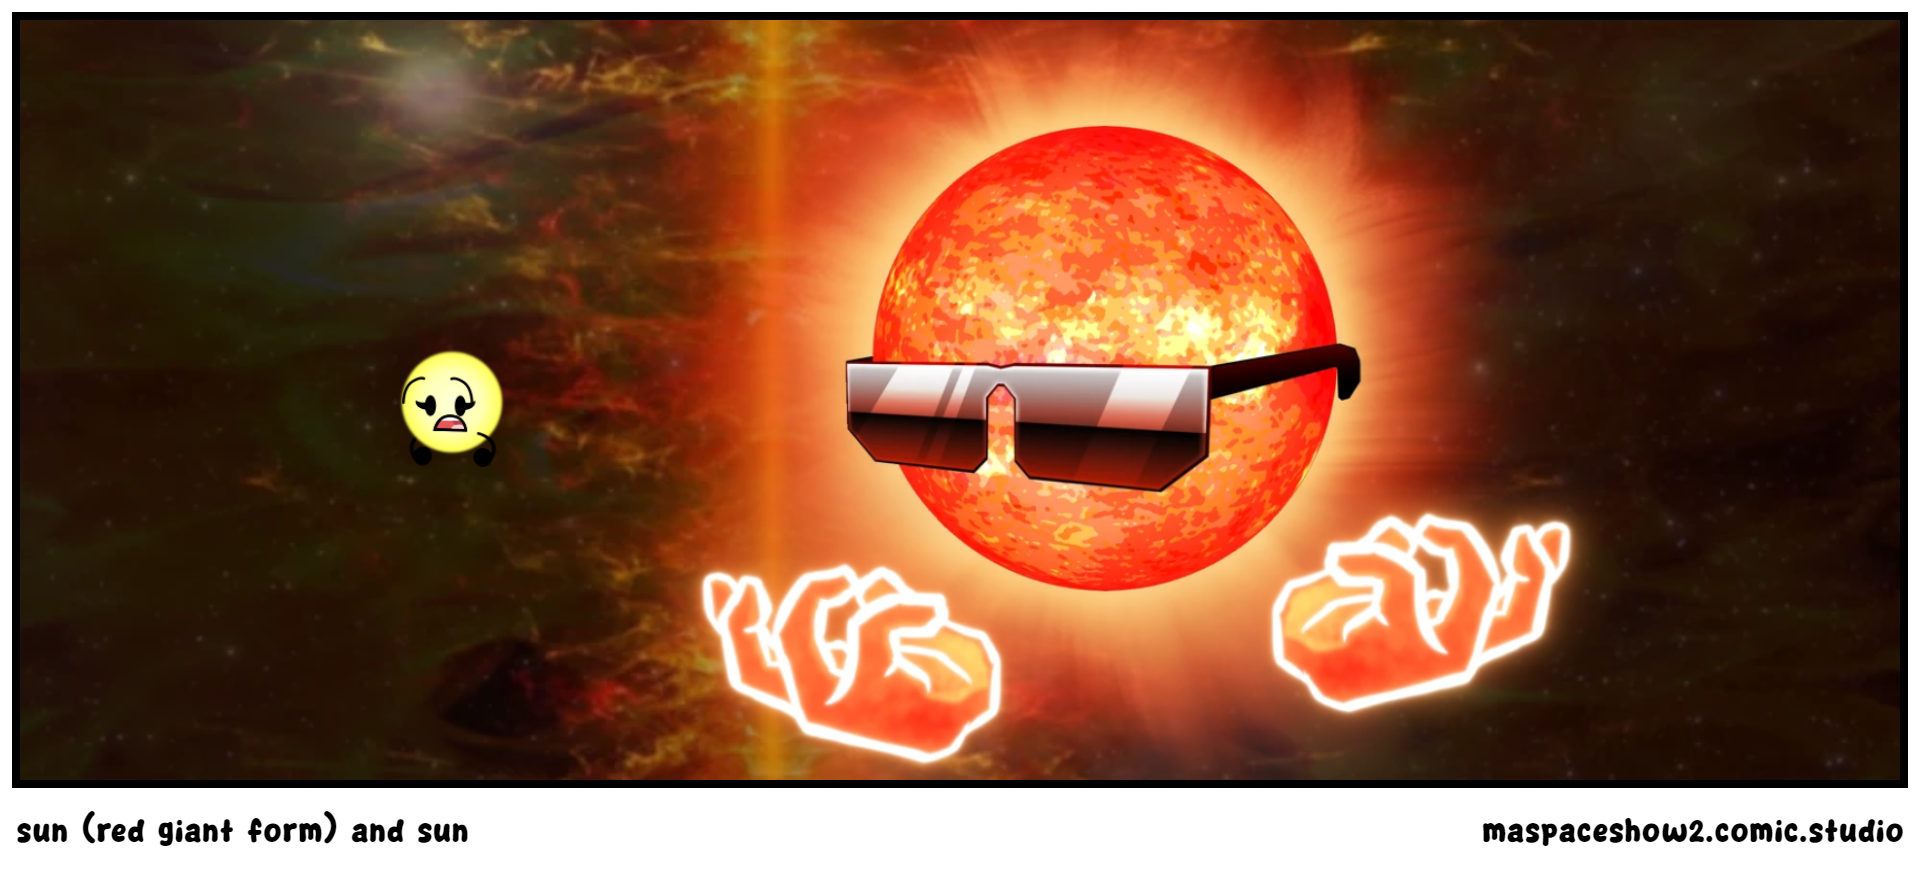 sun (red giant form) and sun